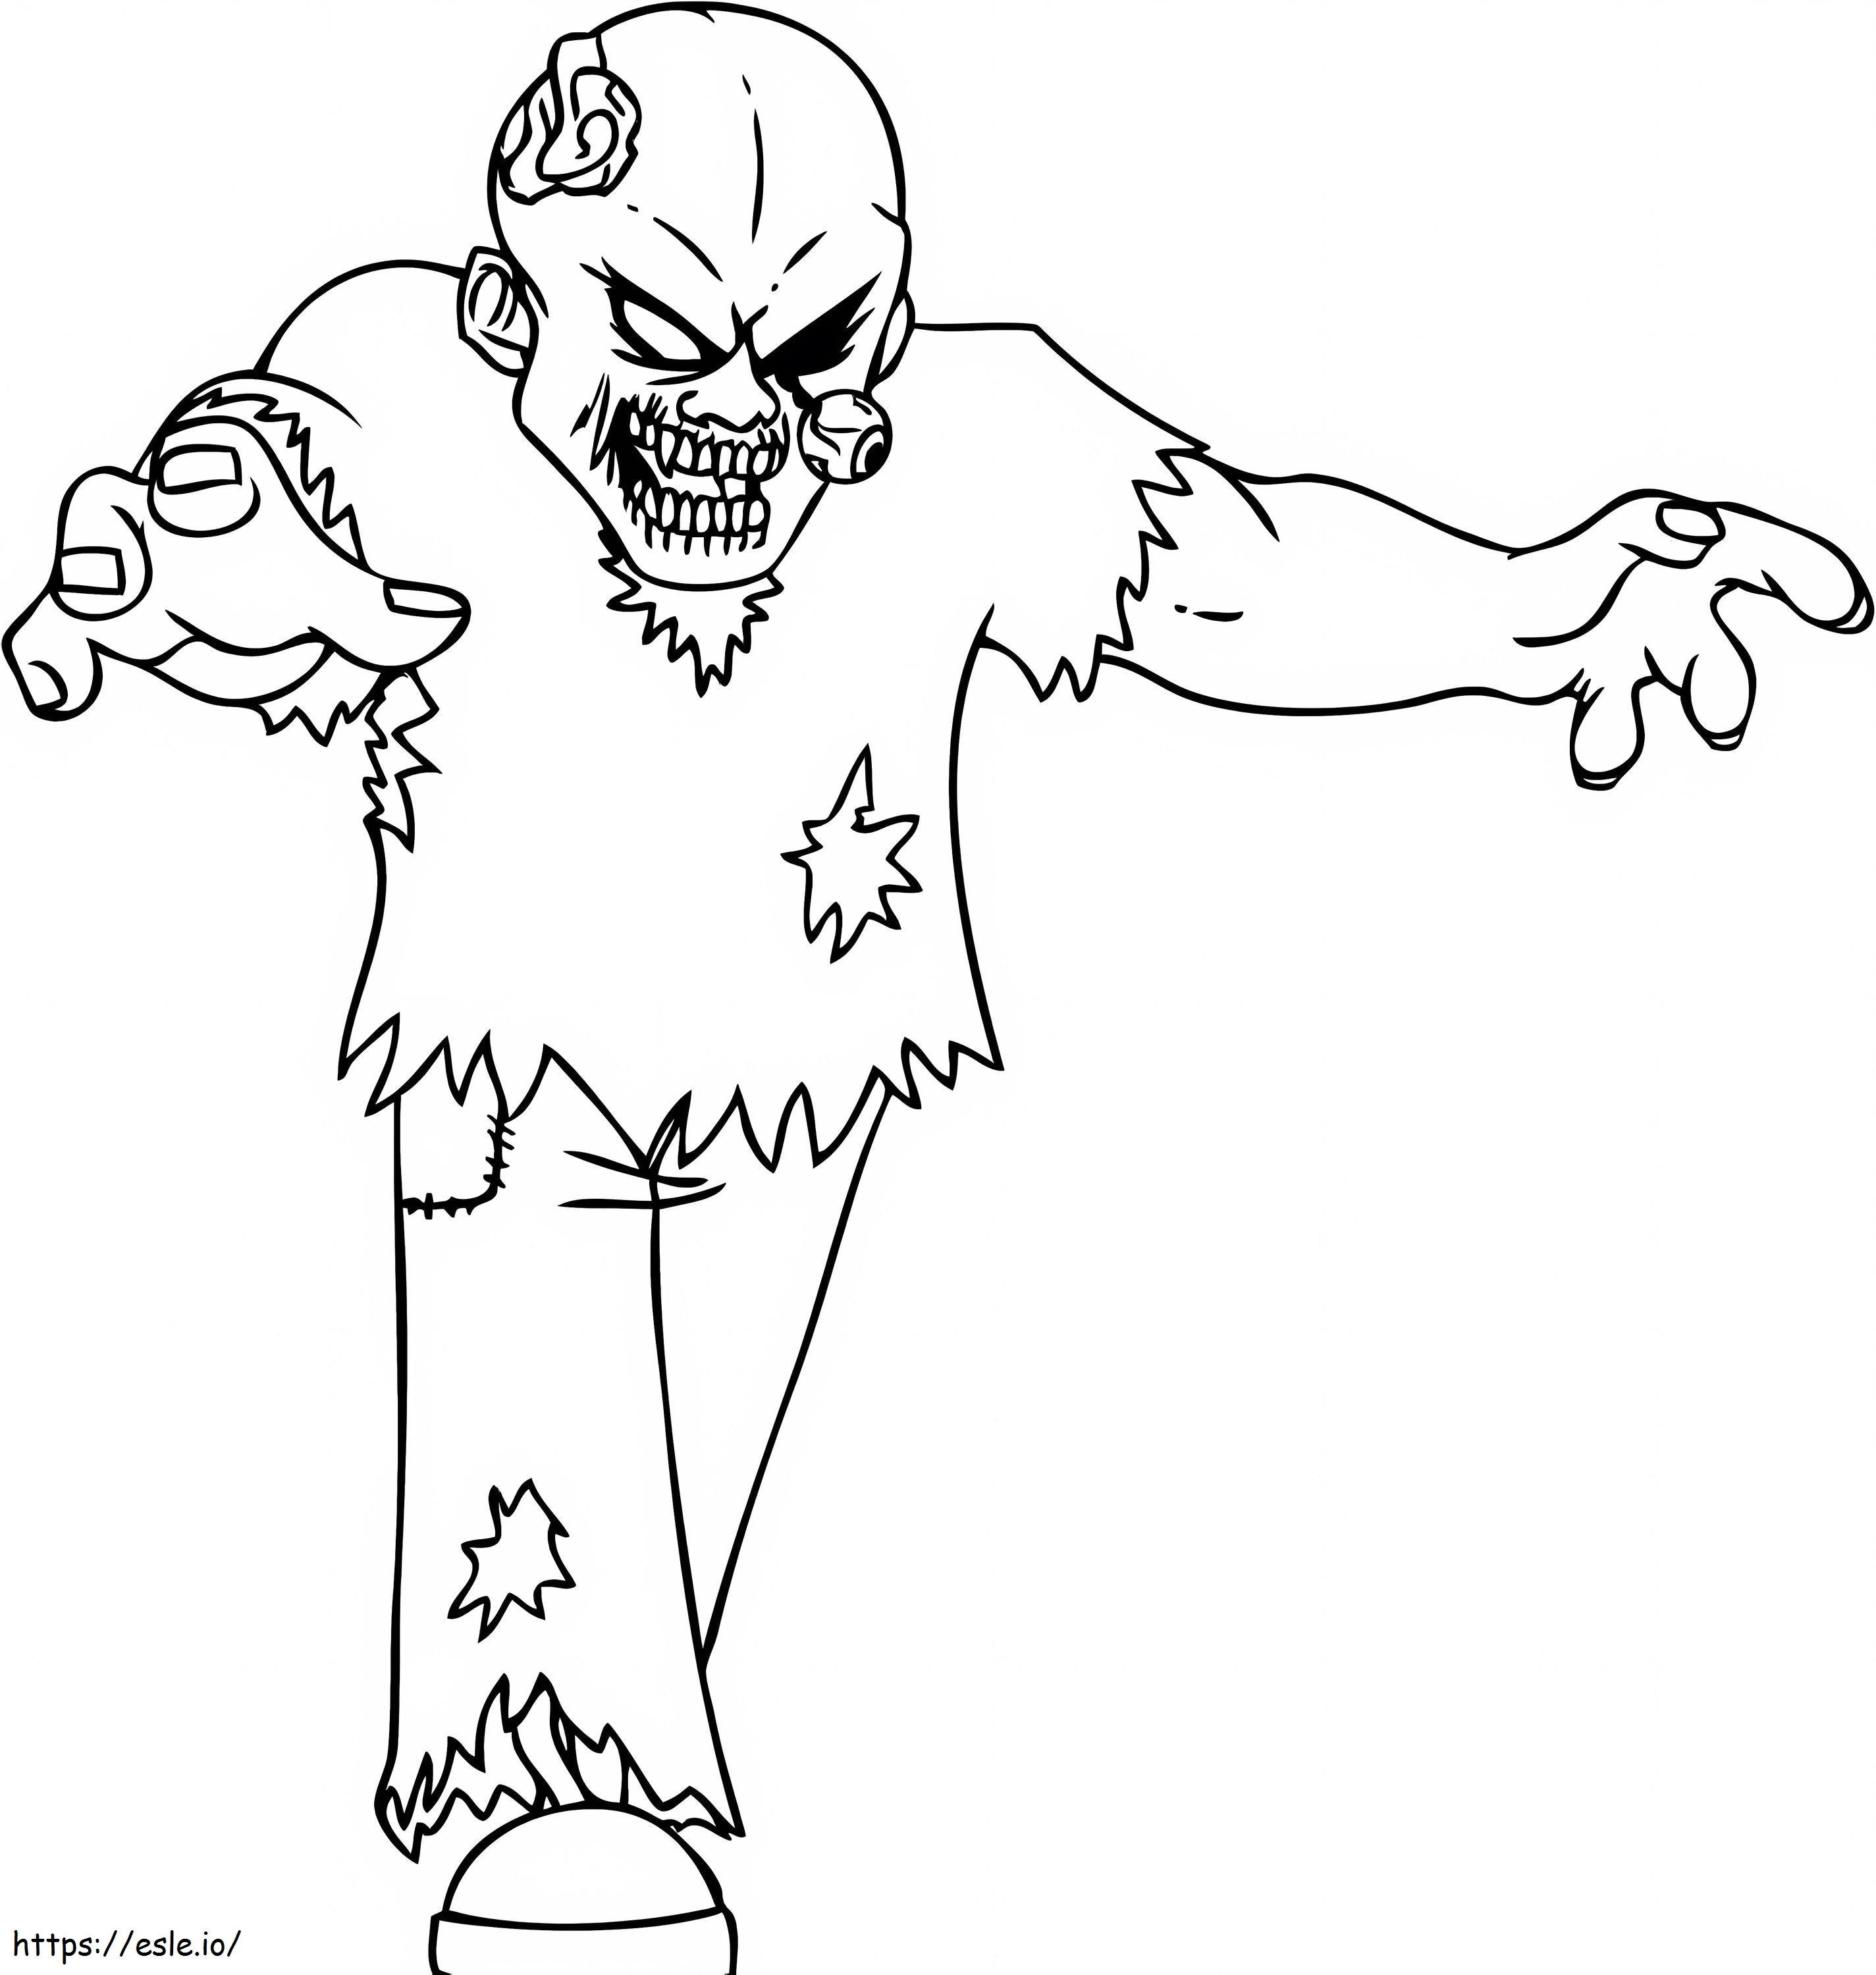 Undead Attack coloring page